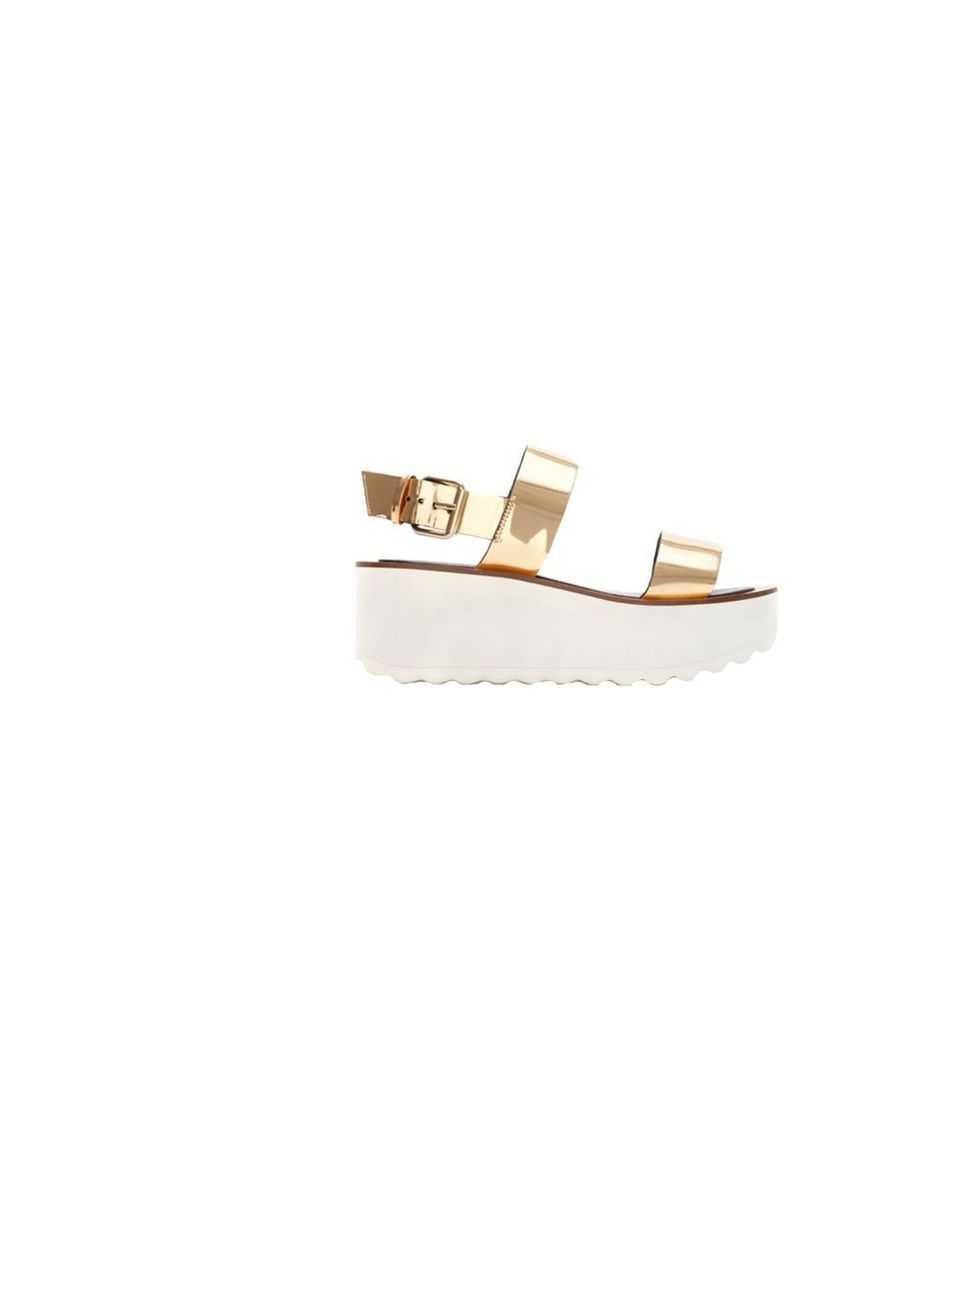 <p>Space-age, retro and eccentric, <a href="http://www.zara.com/uk/en/new-this-week/woman/shiny-block-wedge-c363008p1294702.html">Zara</a>s metallic flatforms tick every box, £59.99</p>